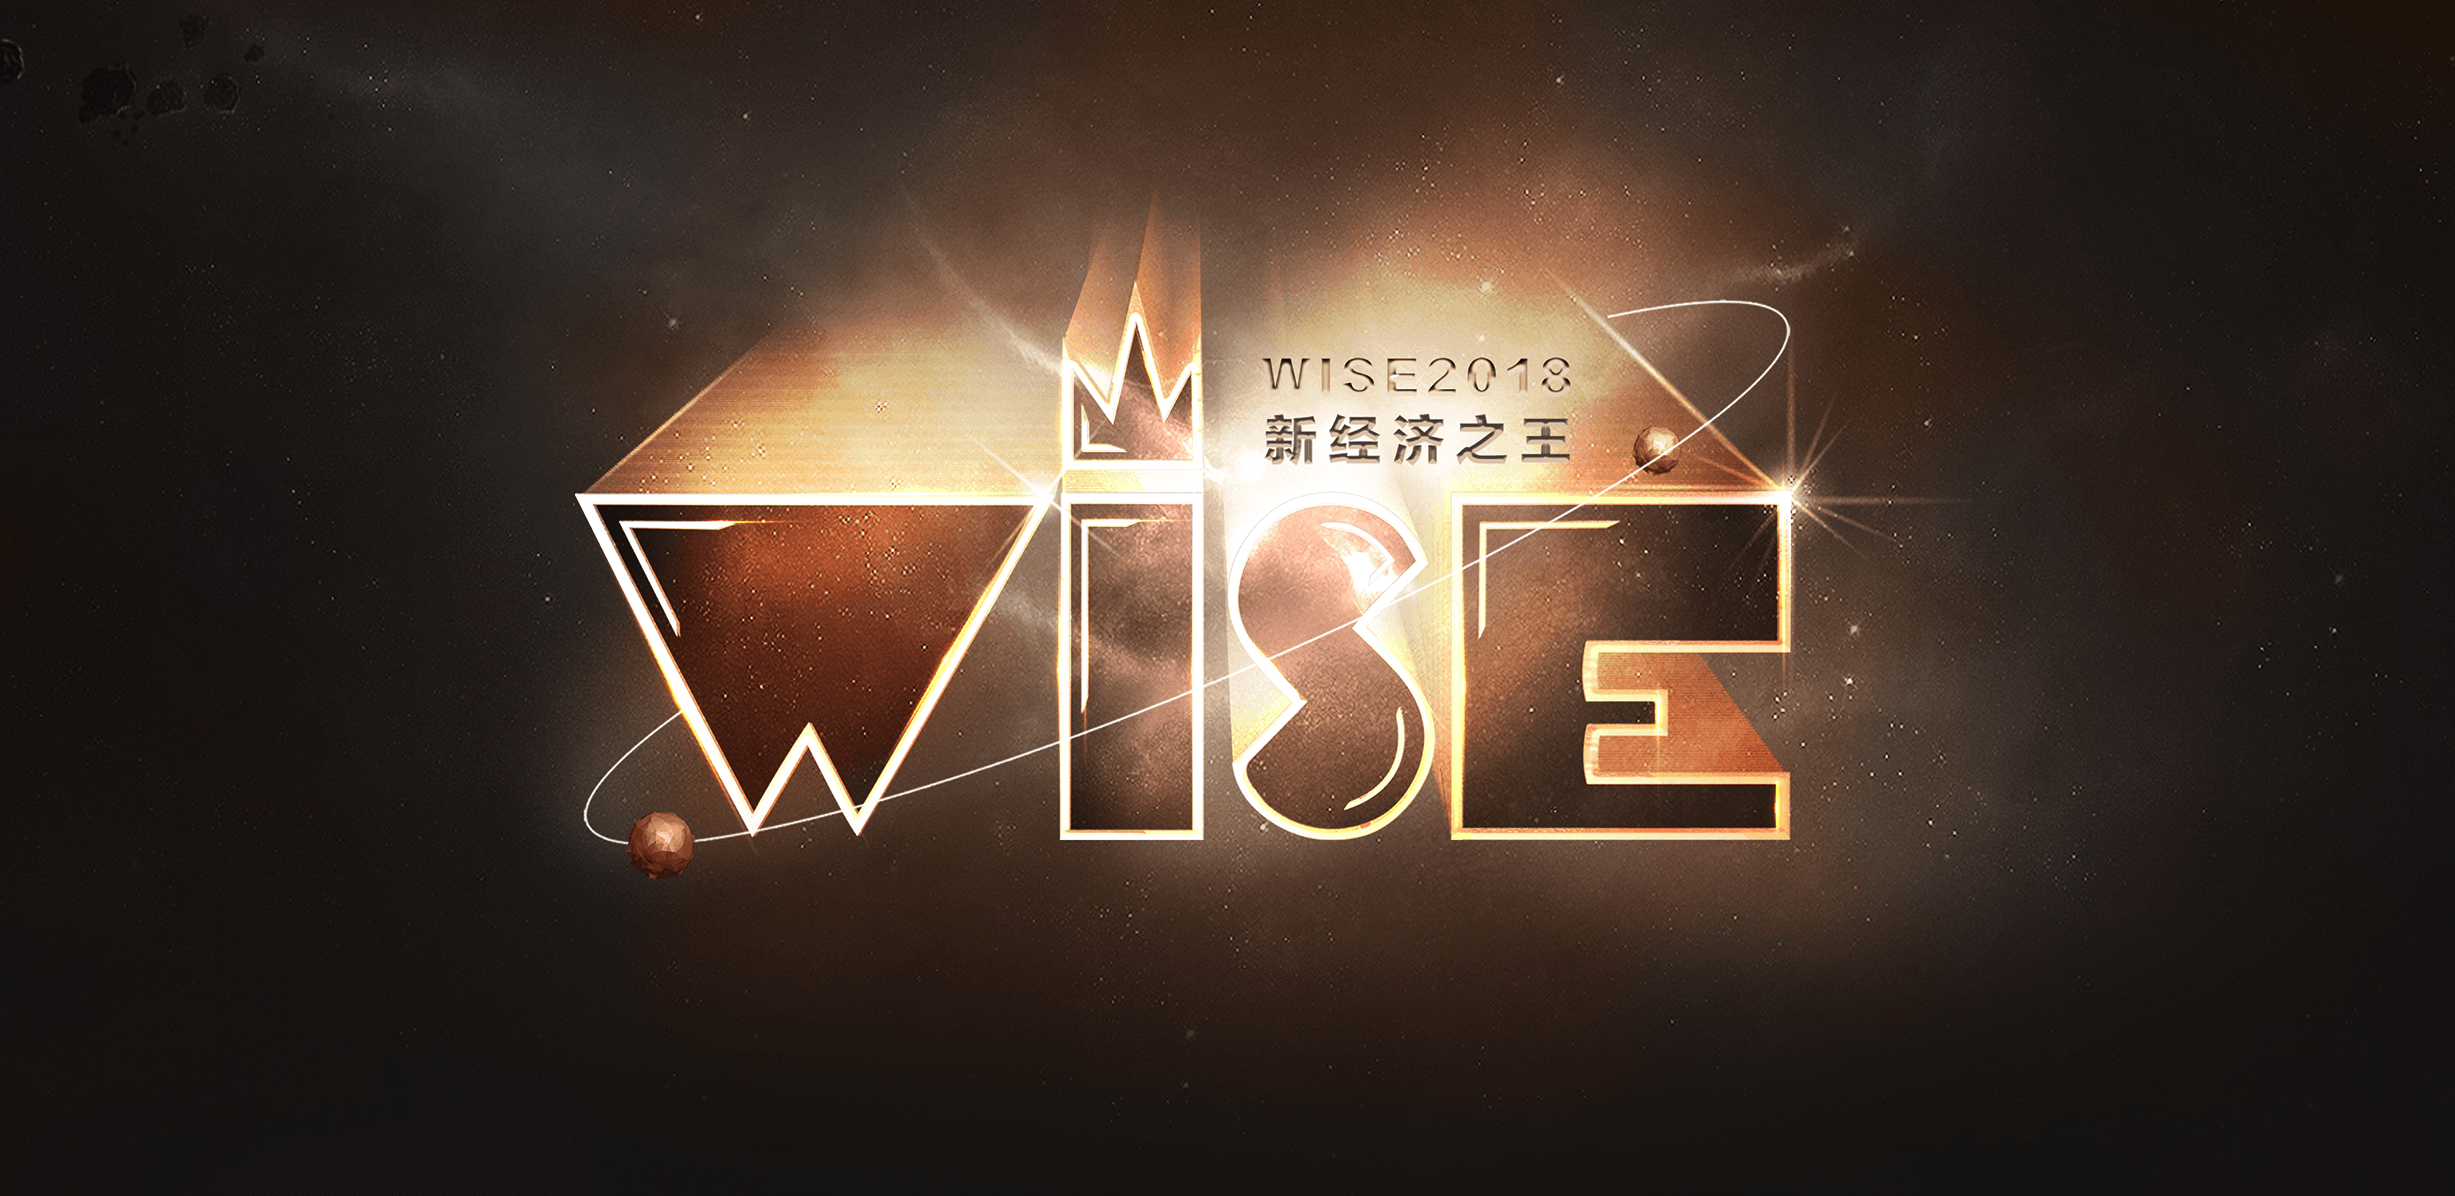 WISE 2018: The go-to conference to learn the gist of China tech